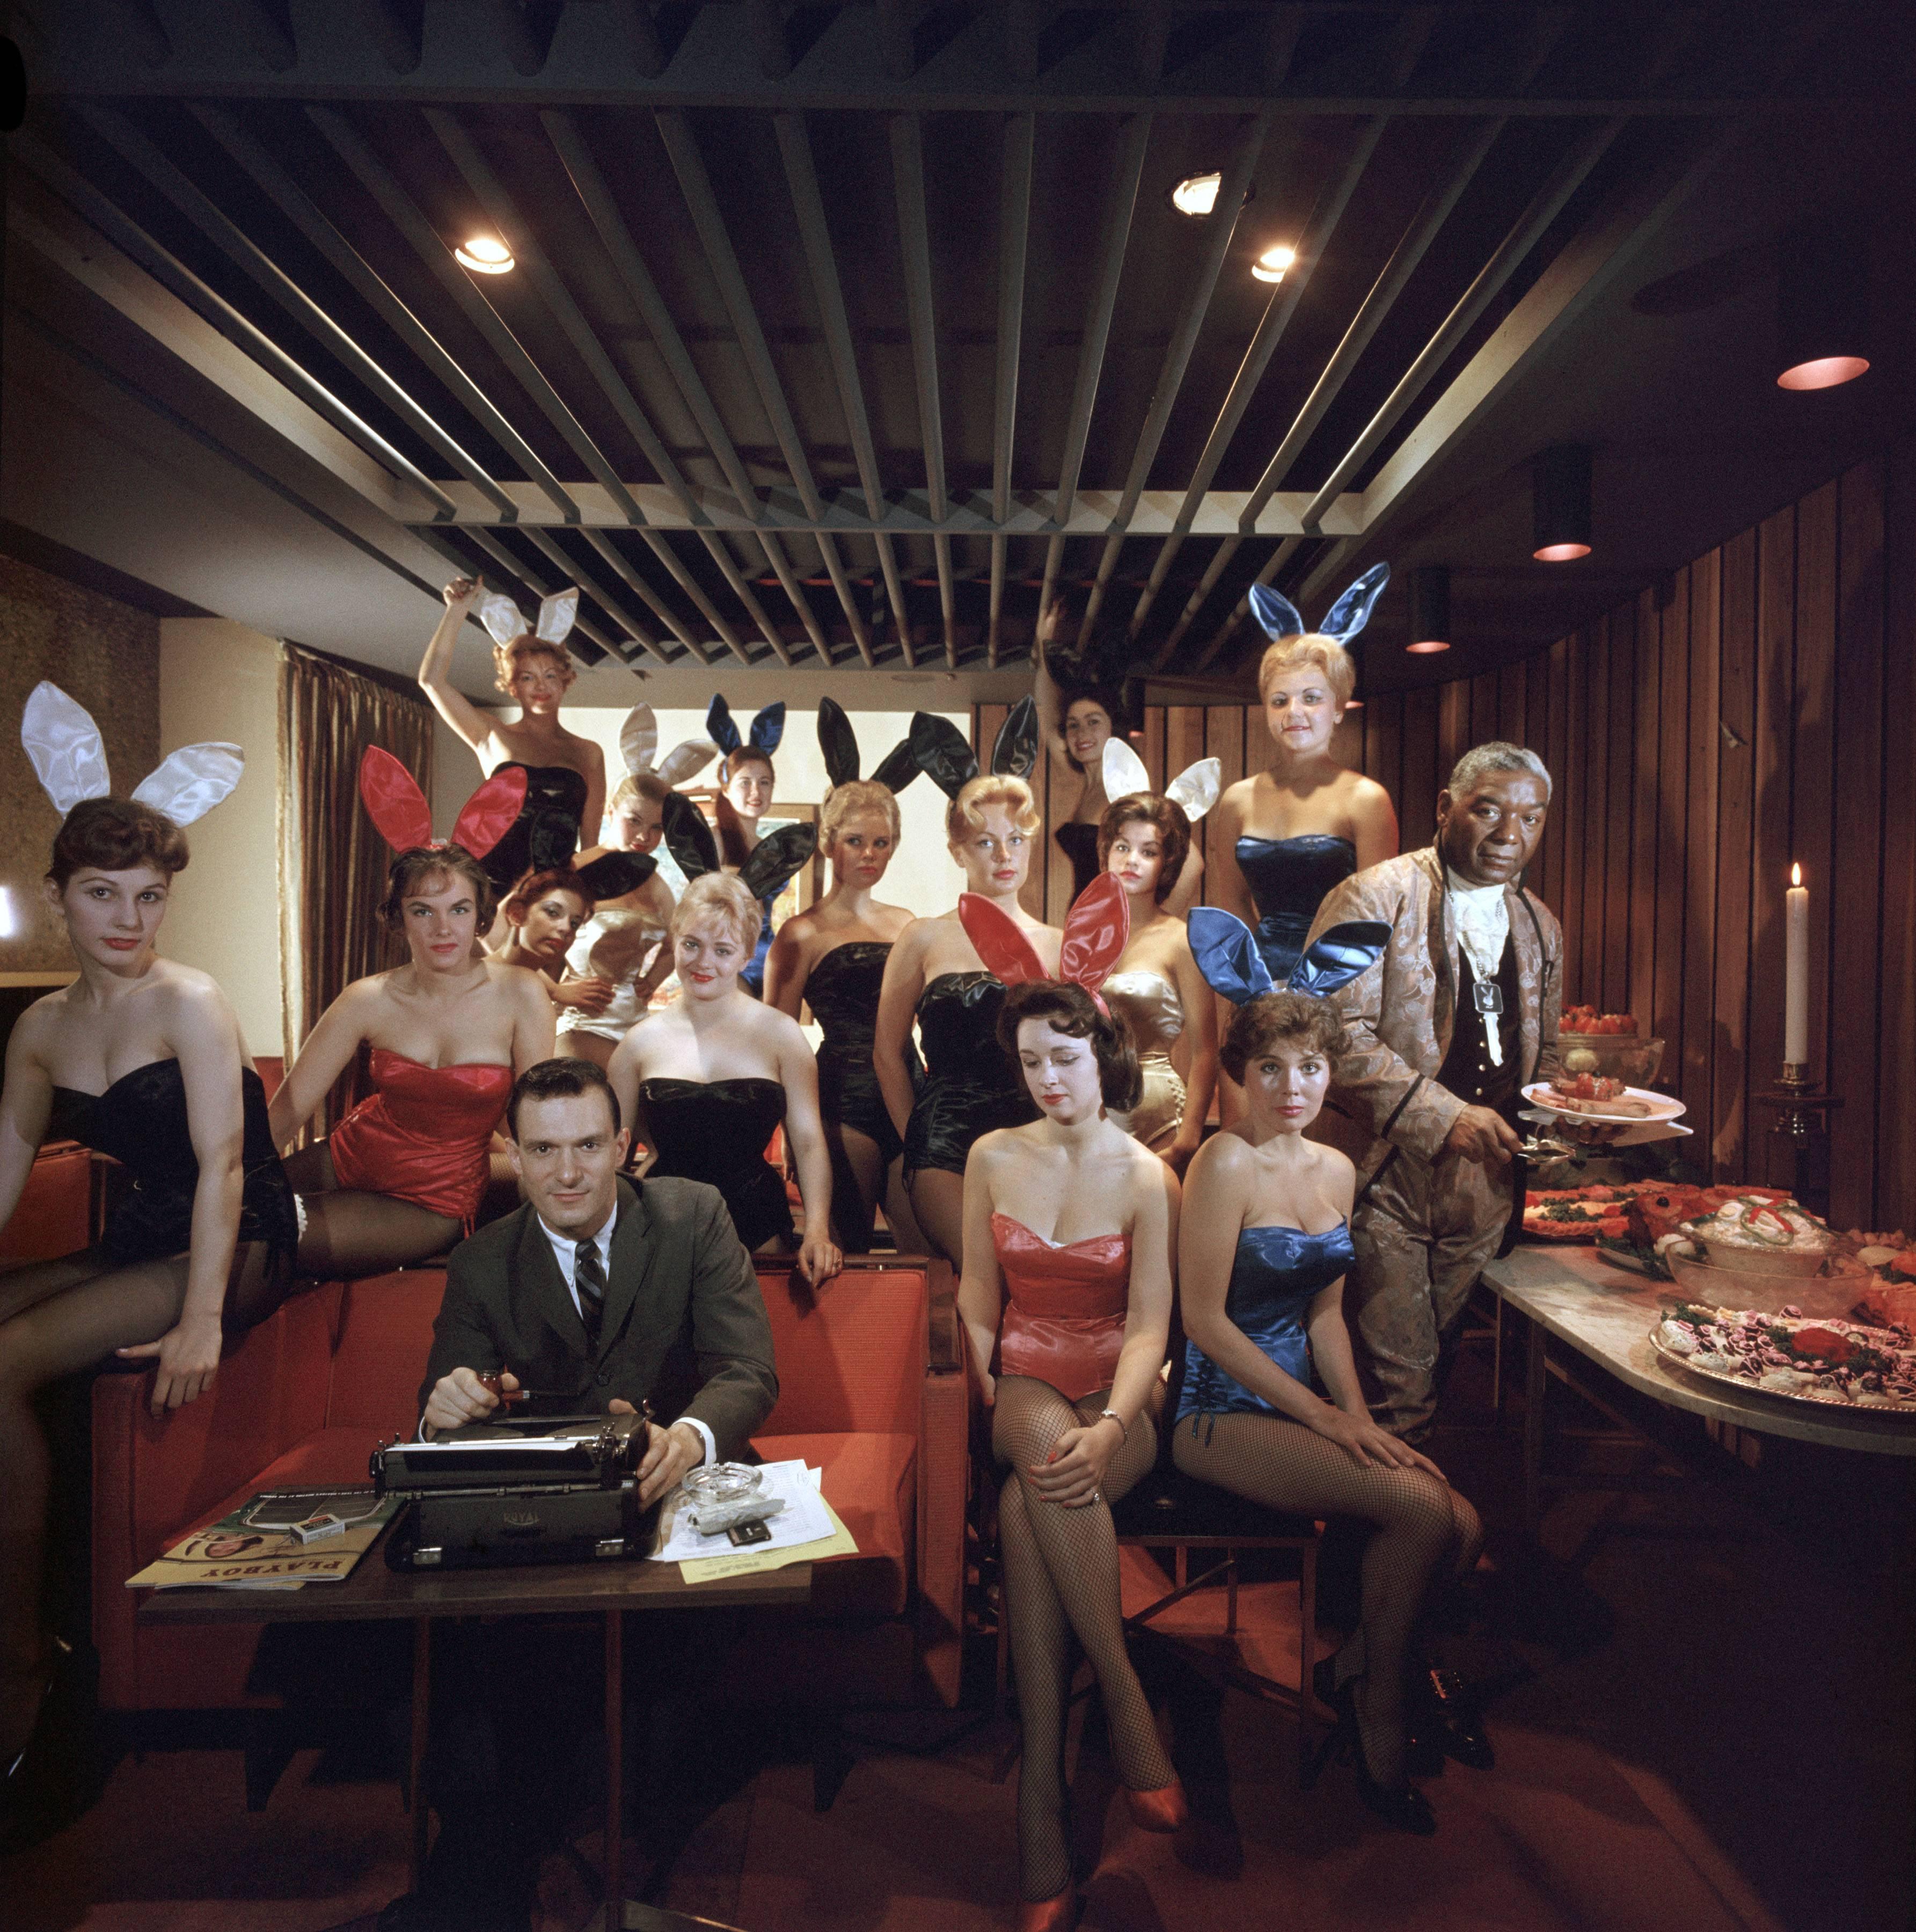 Slim Aarons Color Photograph - Man's Work, 1960: Hugh Hefner and Bunnies at the Playboy Key Club, Chicago